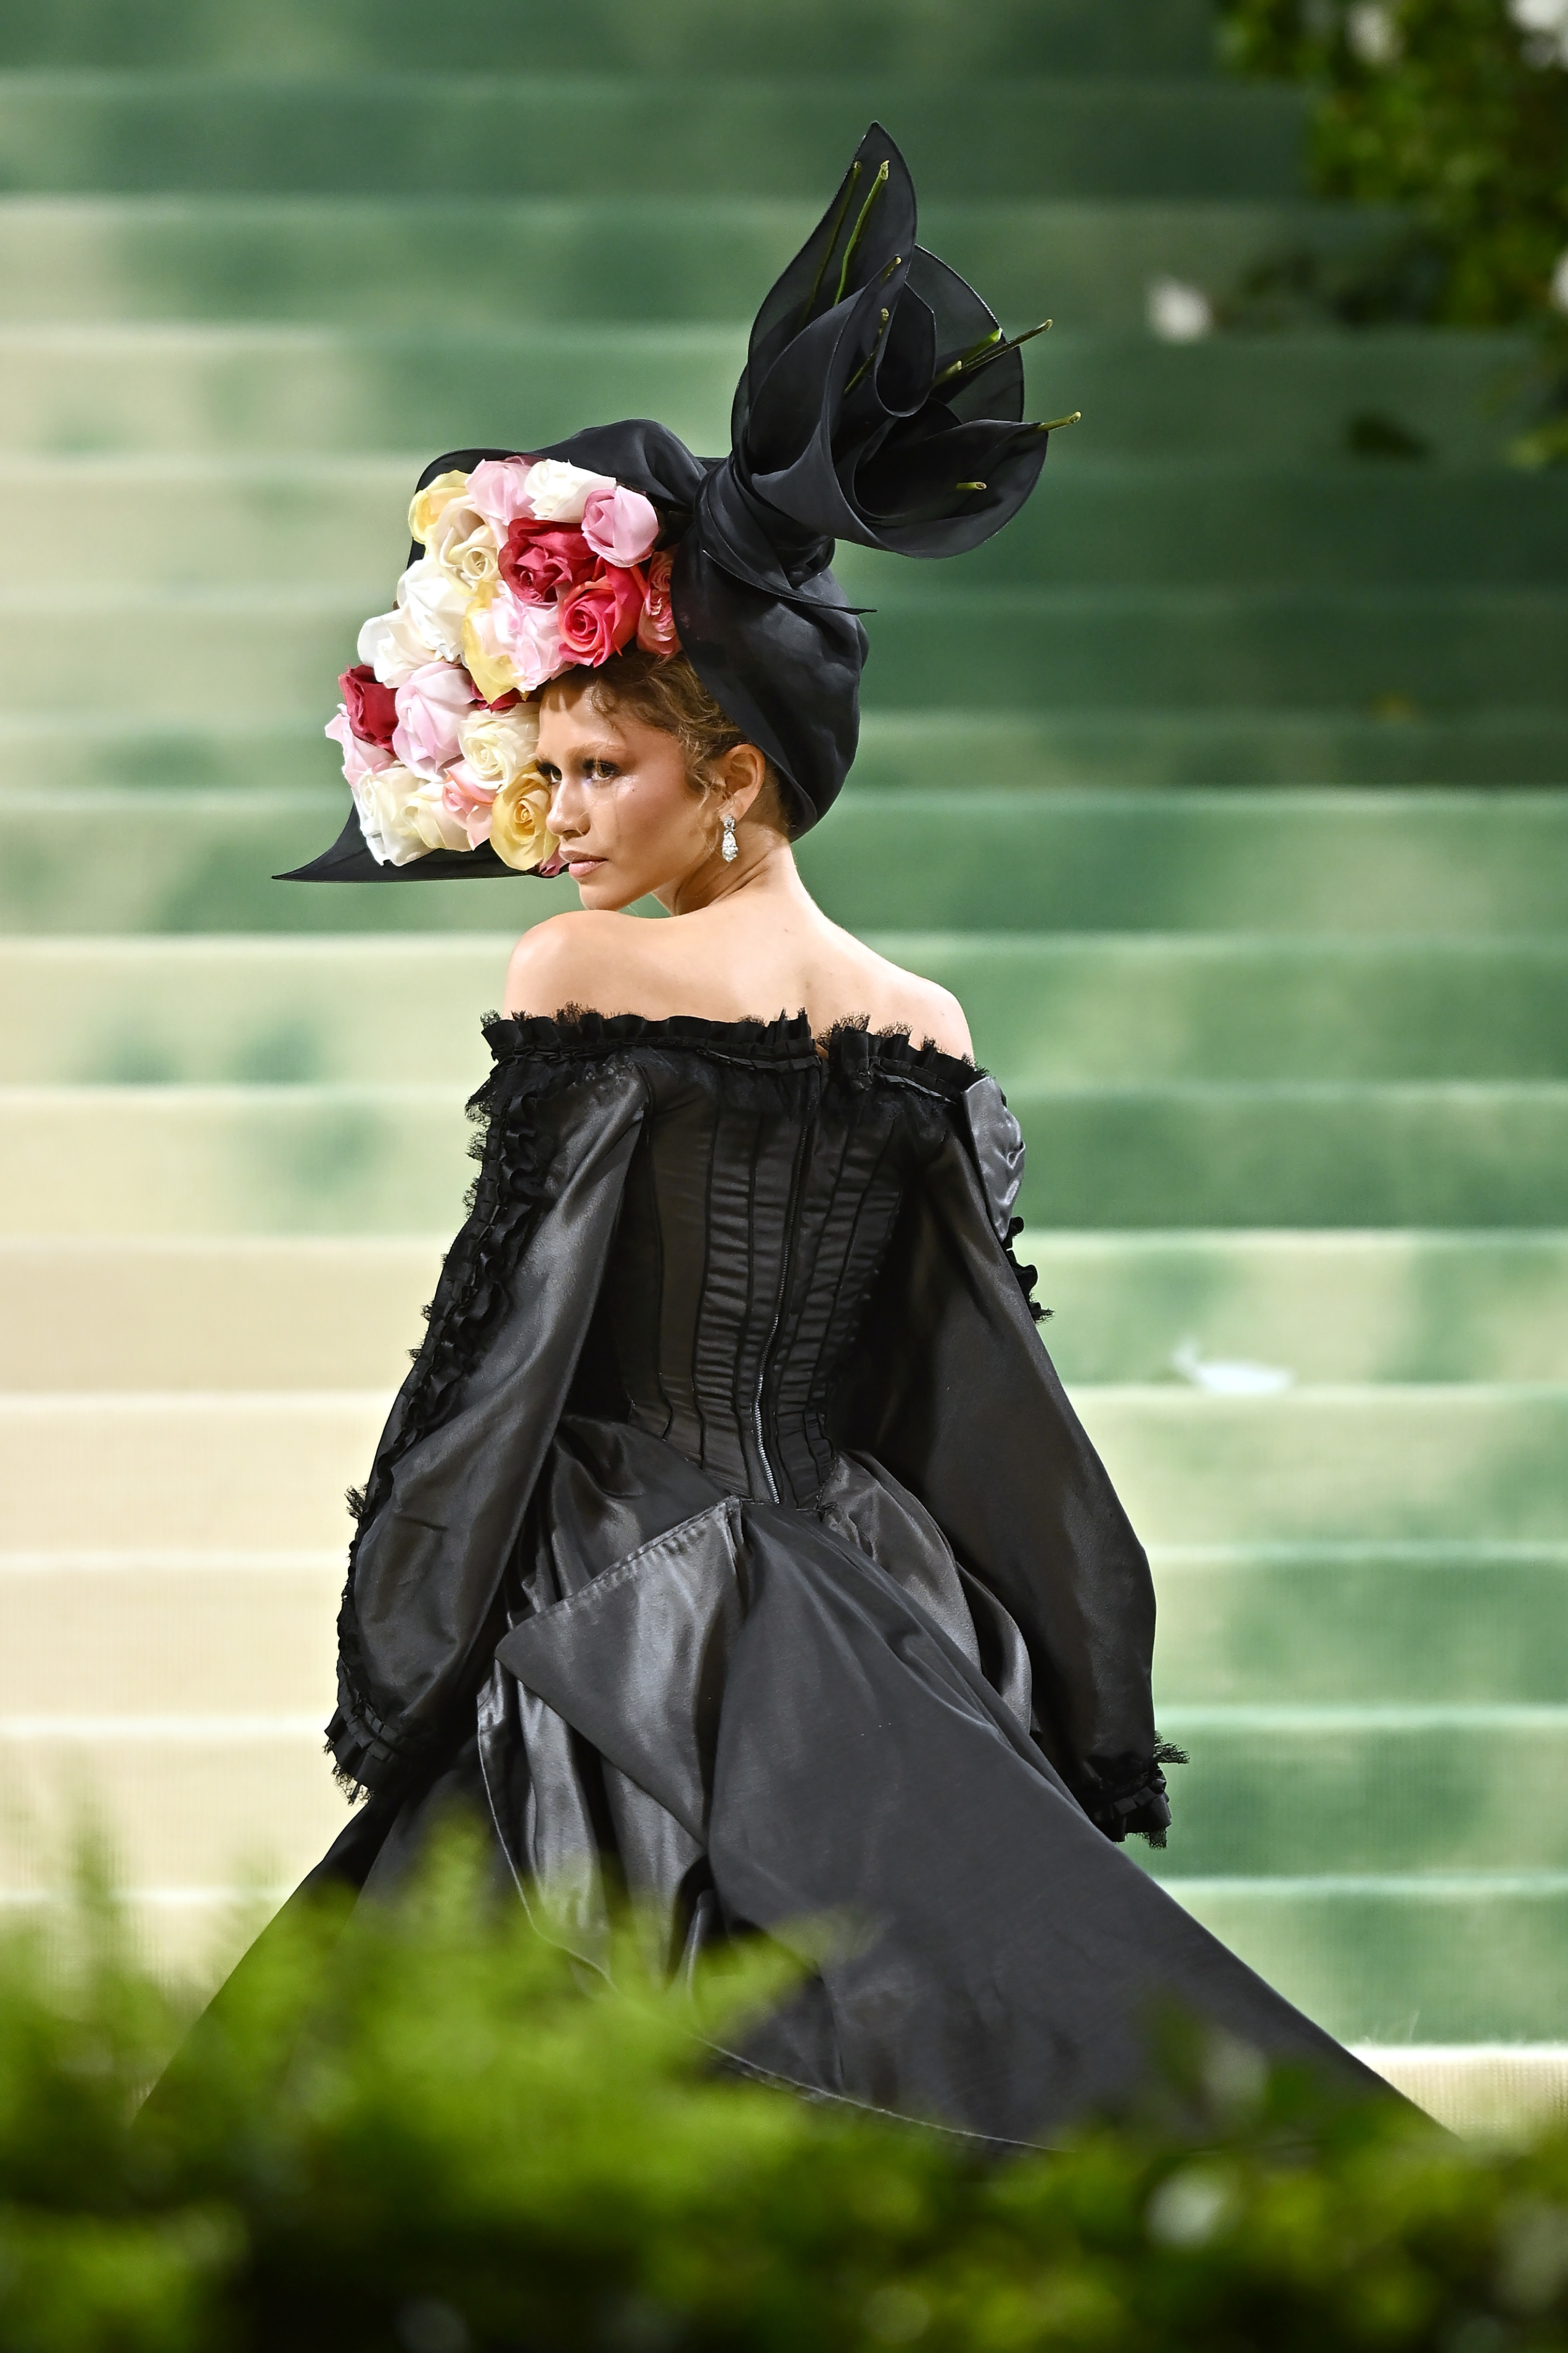 Zendaya in a dramatic black outfit with a large floral hat at an event